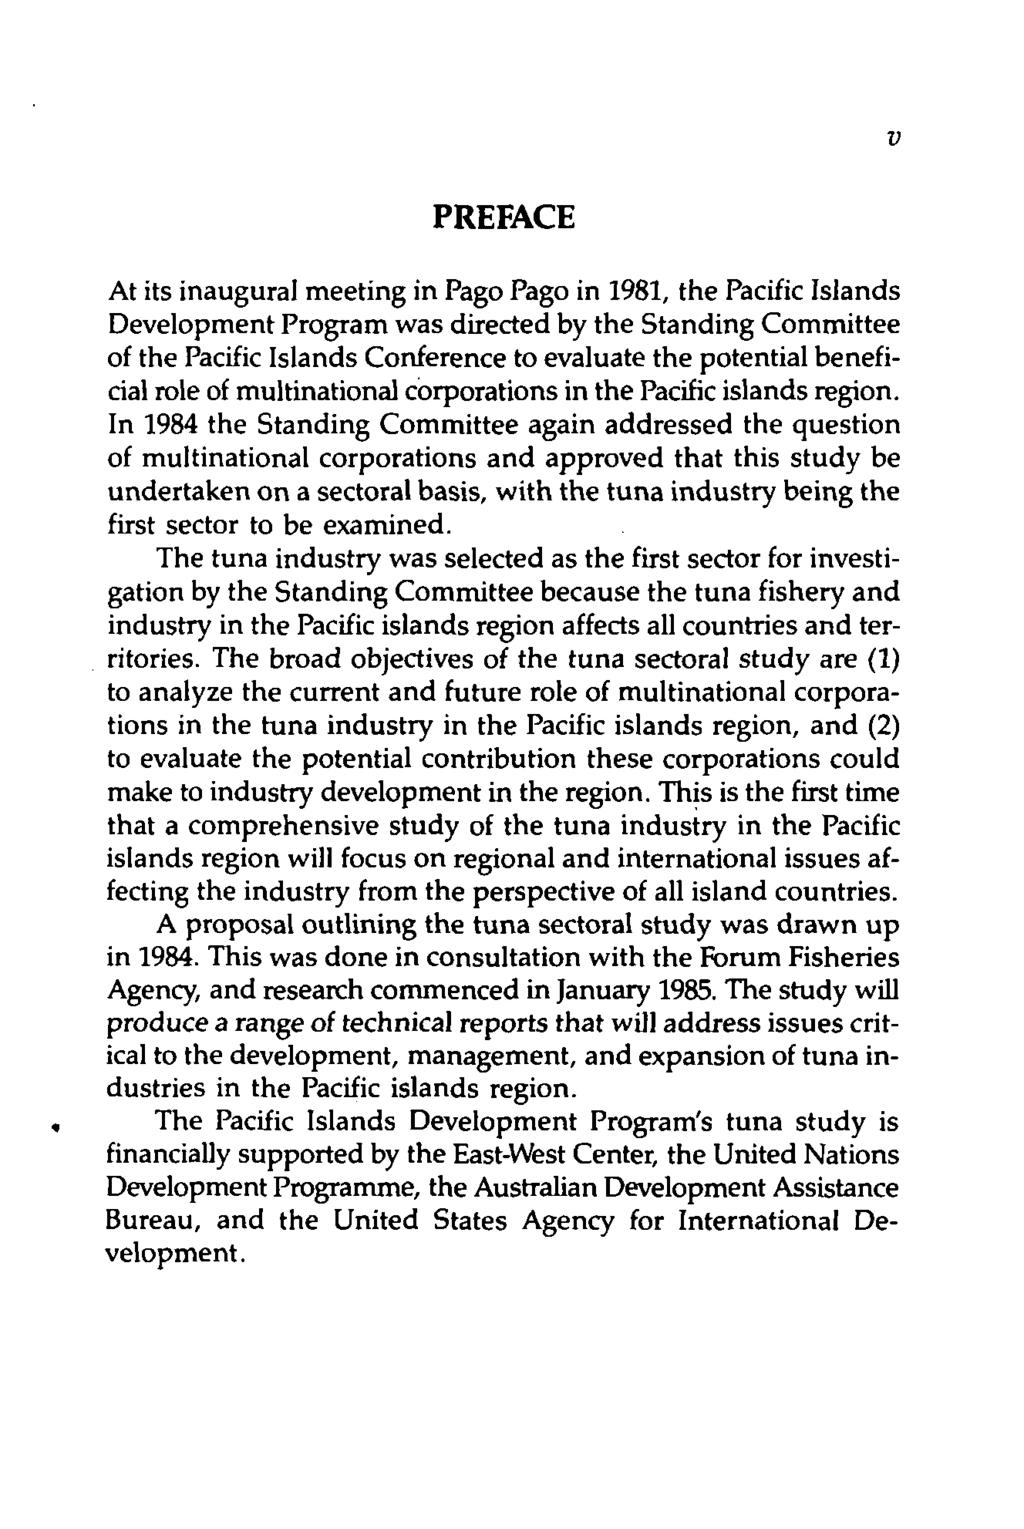 V PREFACE At its inaugural meeting in Pago Pago in 1981, the Pacific Islands Development Program was directed by the Standing Committee of the Pacific Islands Conference to evaluate the potential